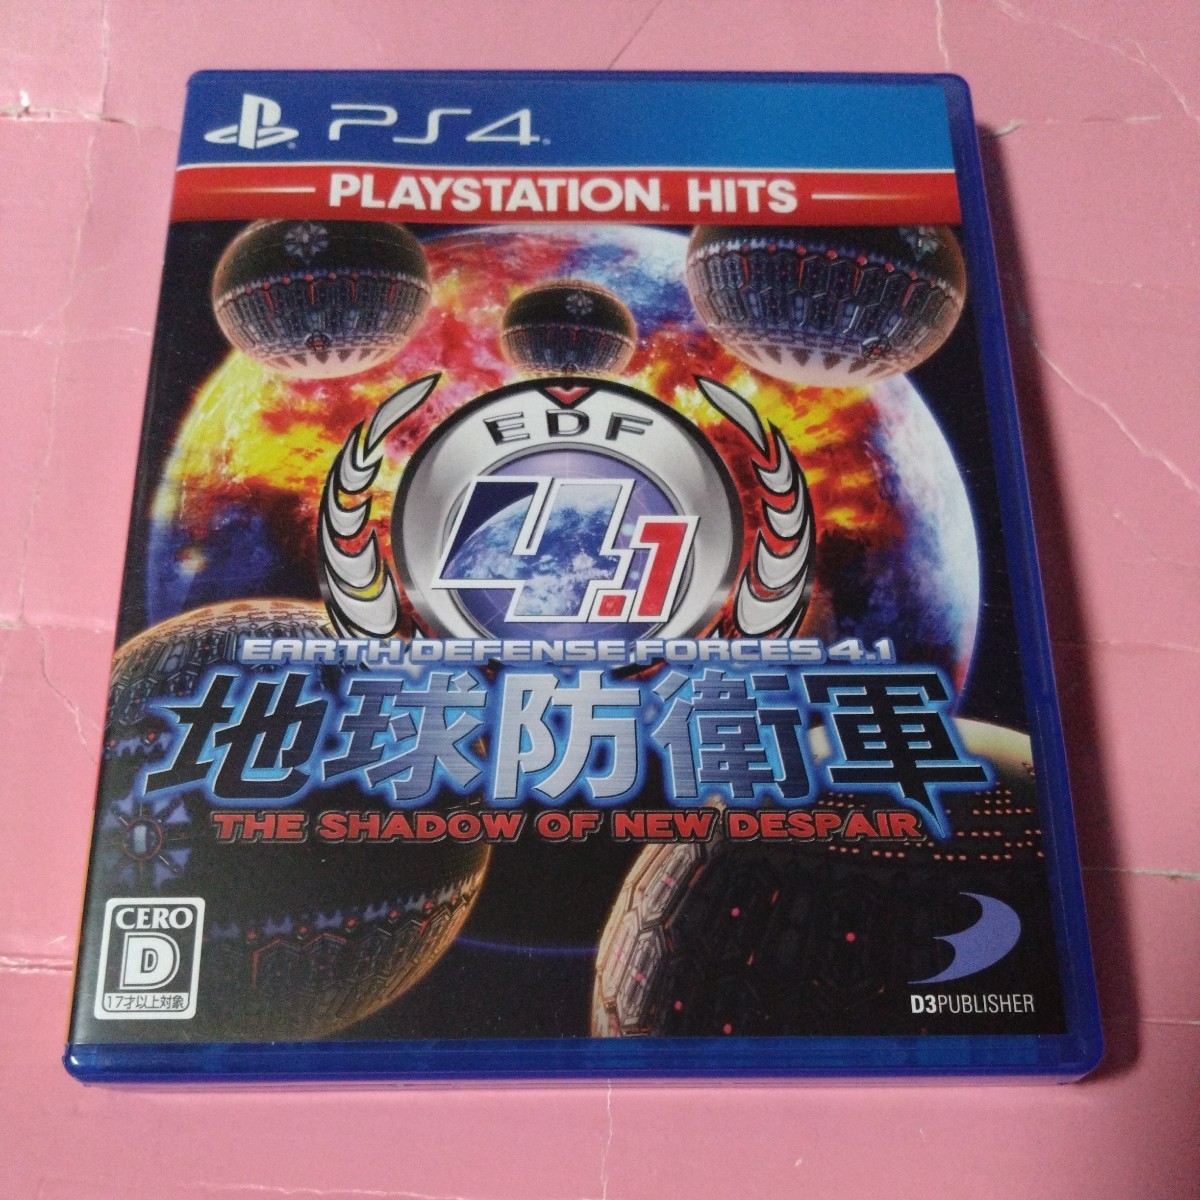 【PS4】 地球防衛軍4.1 THE SHADOW OF NEW DESPAIR [PlayStation Hits]